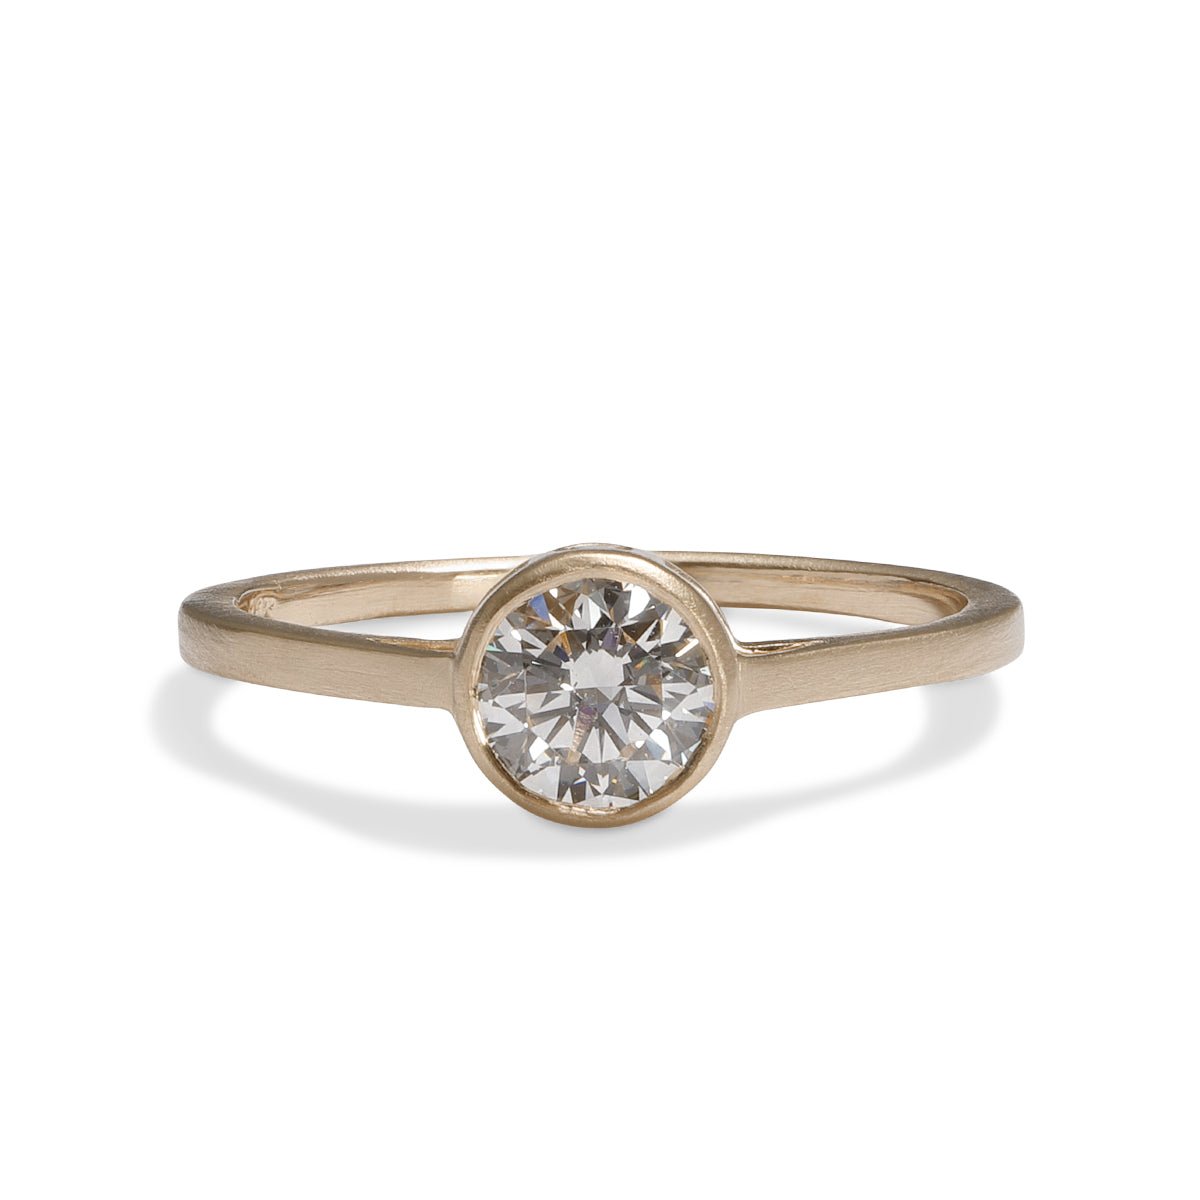 Sano ring from Betsy & Iya in a 14K recycled gold band with two accent diamonds inset on the side and a central round brilliant cut lab-grown diamond (0.6 ct).